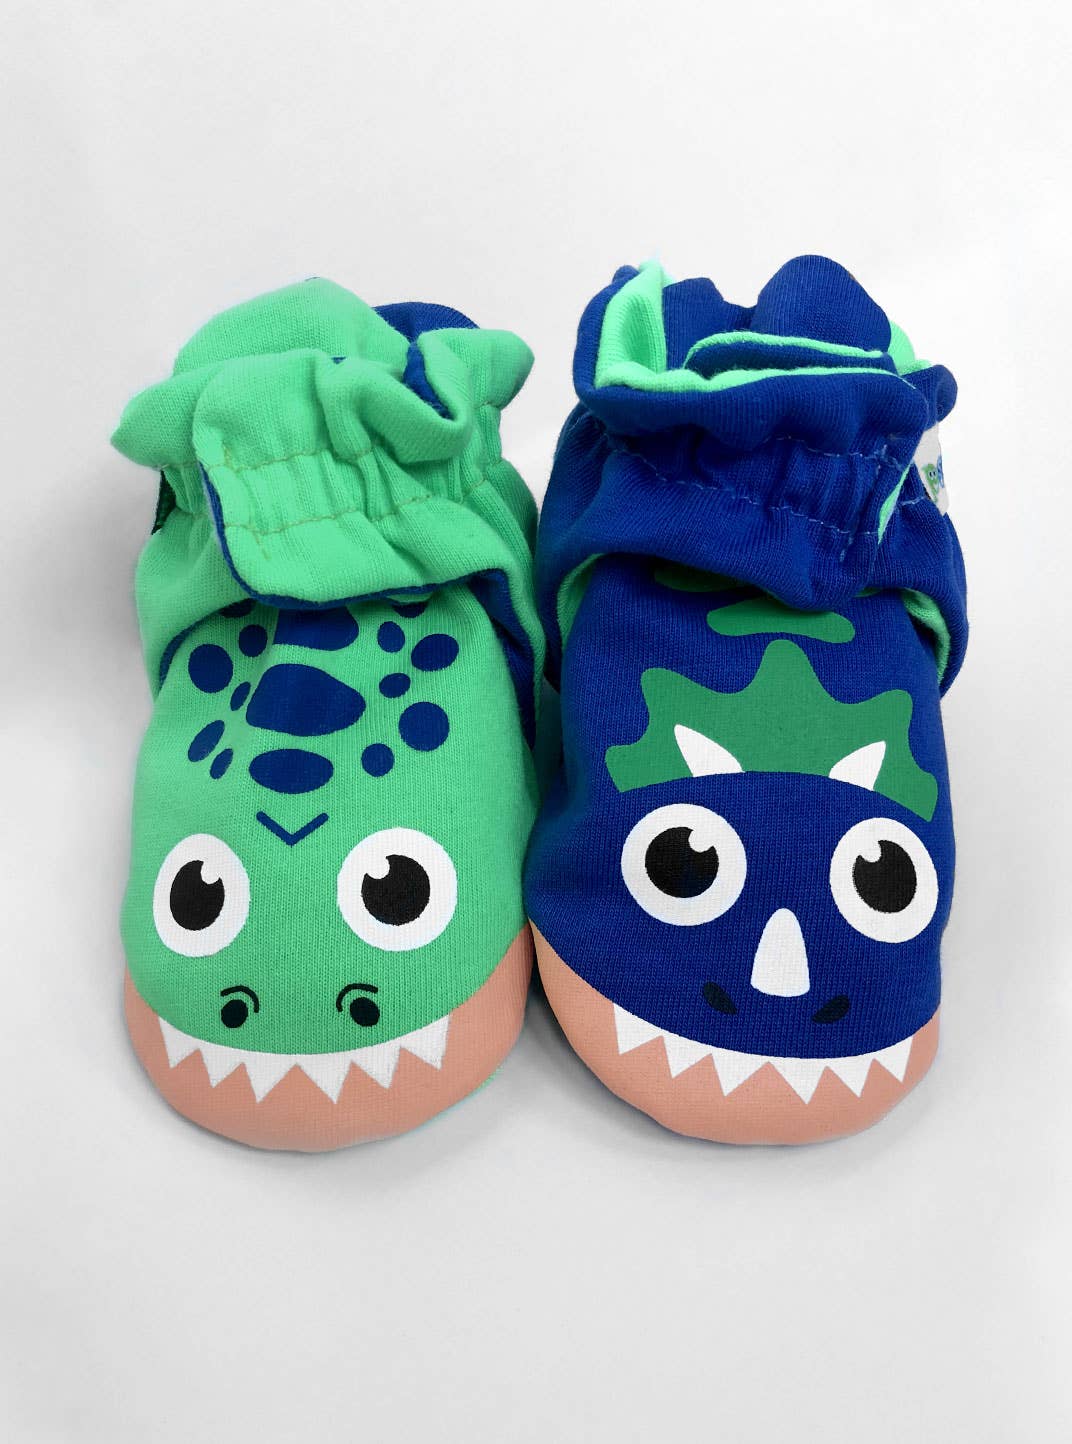 T-Rex & Triceratops Dinosaurs Non-Slip Baby Booties: 12-18 Months